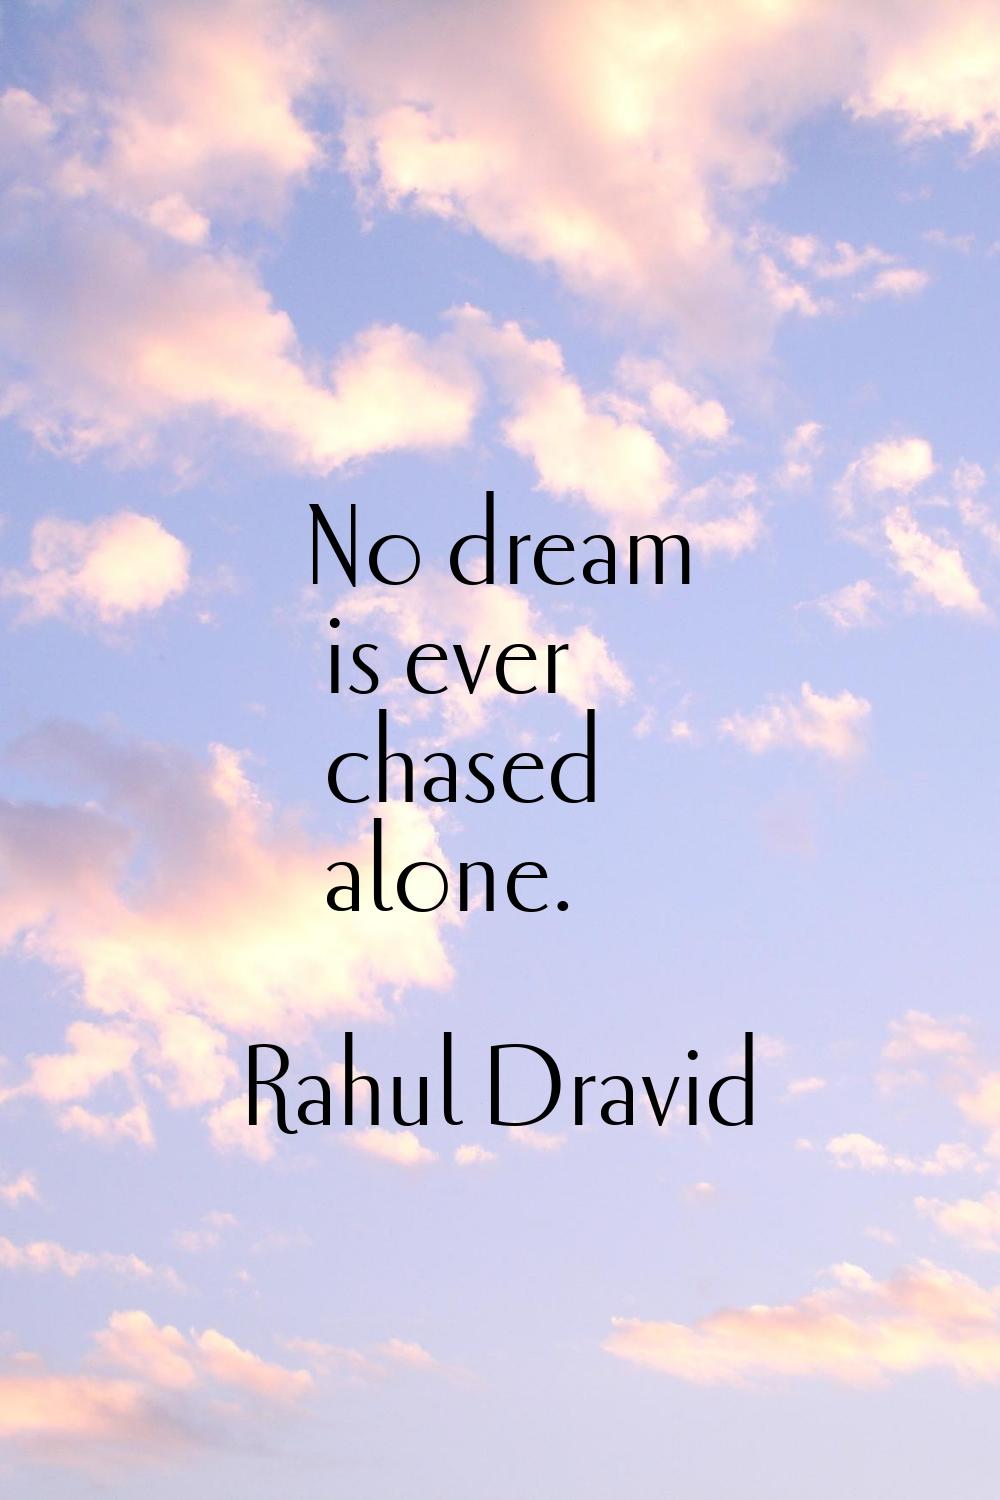 No dream is ever chased alone.